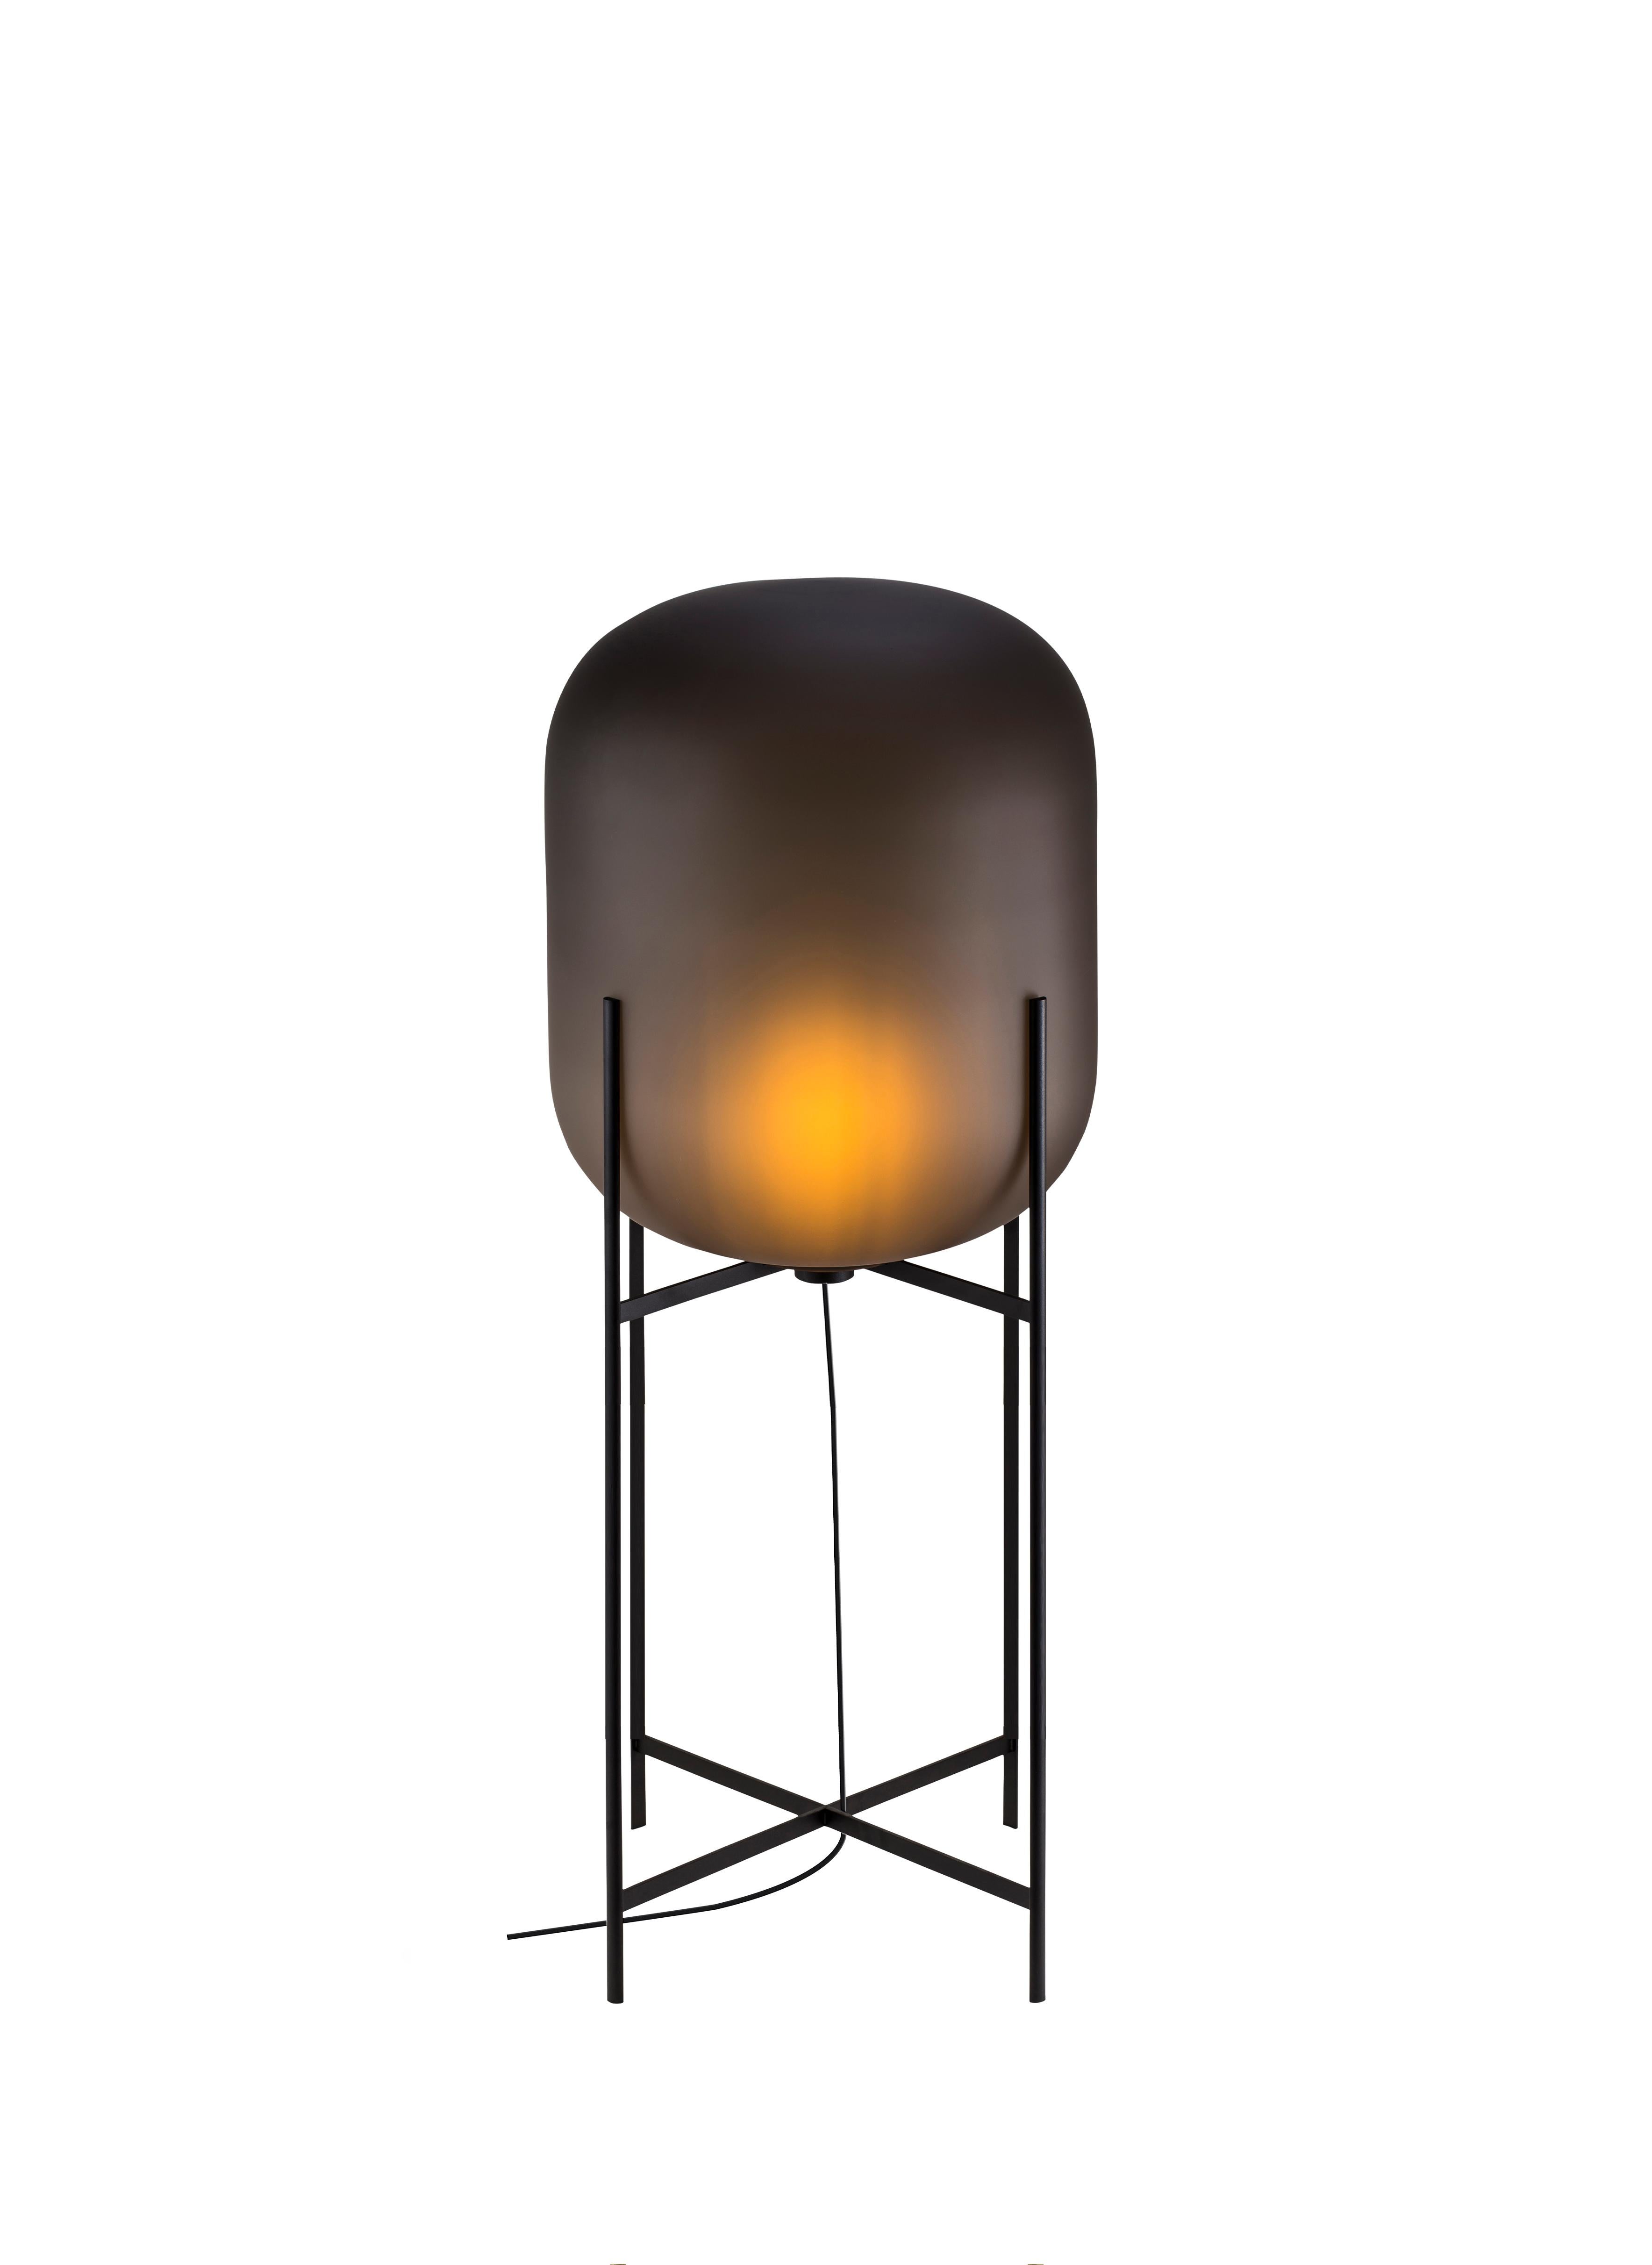 Oda in between smoky grey acetato black floor lamp by Pulpo.
Dimensions: D45 x H111.2 cm
Materials: handblown glass coloured and steel.

Also available in different finishes. Please contact us.

A slender base hugs a bulbous form. An